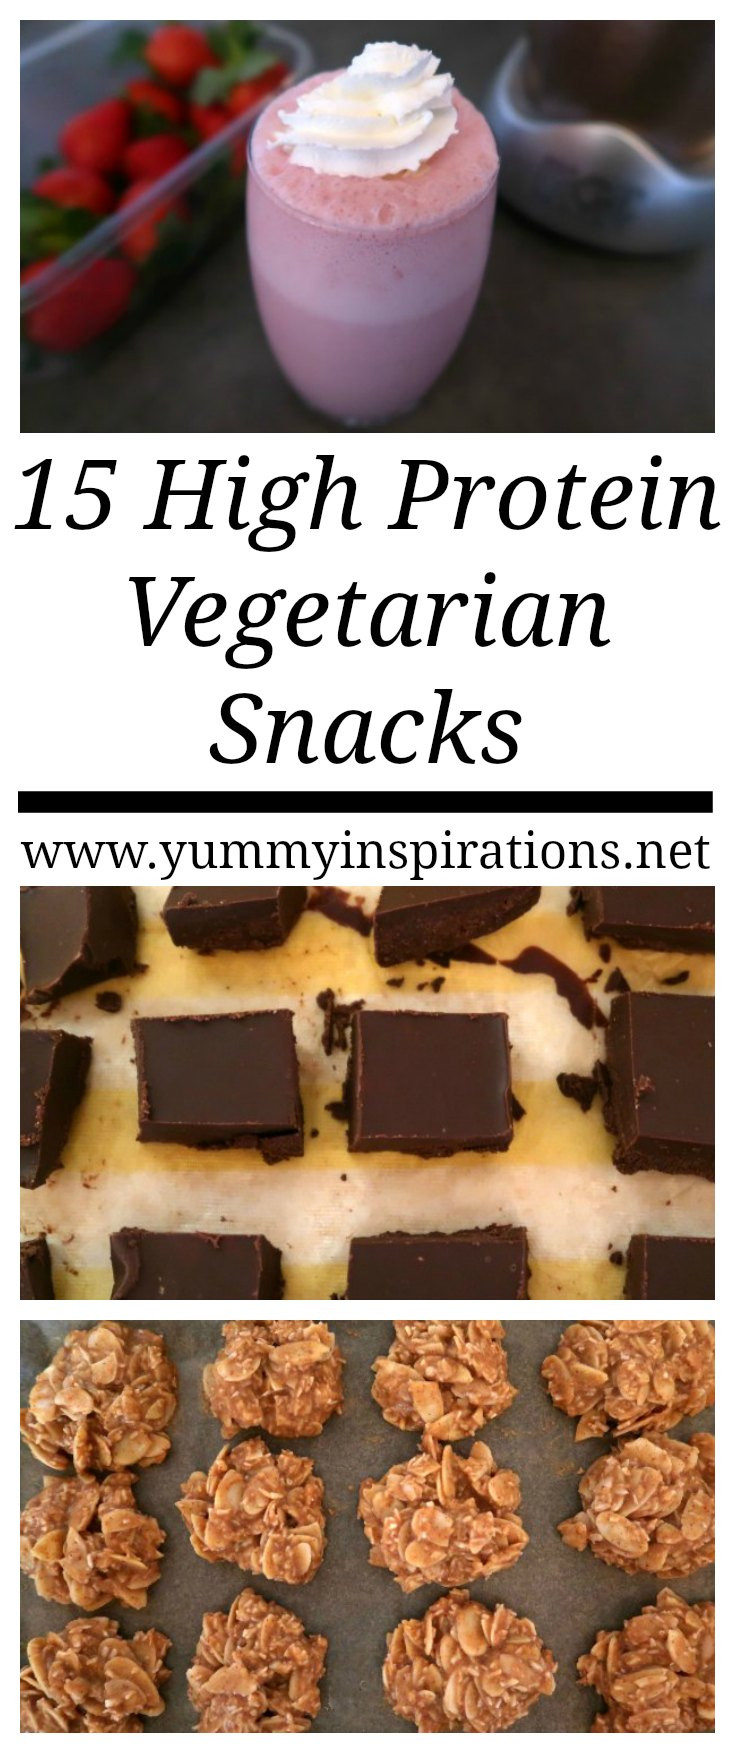 Protein Snacks Recipes
 15 High Protein Ve arian Snacks Easy Meat Free Snack